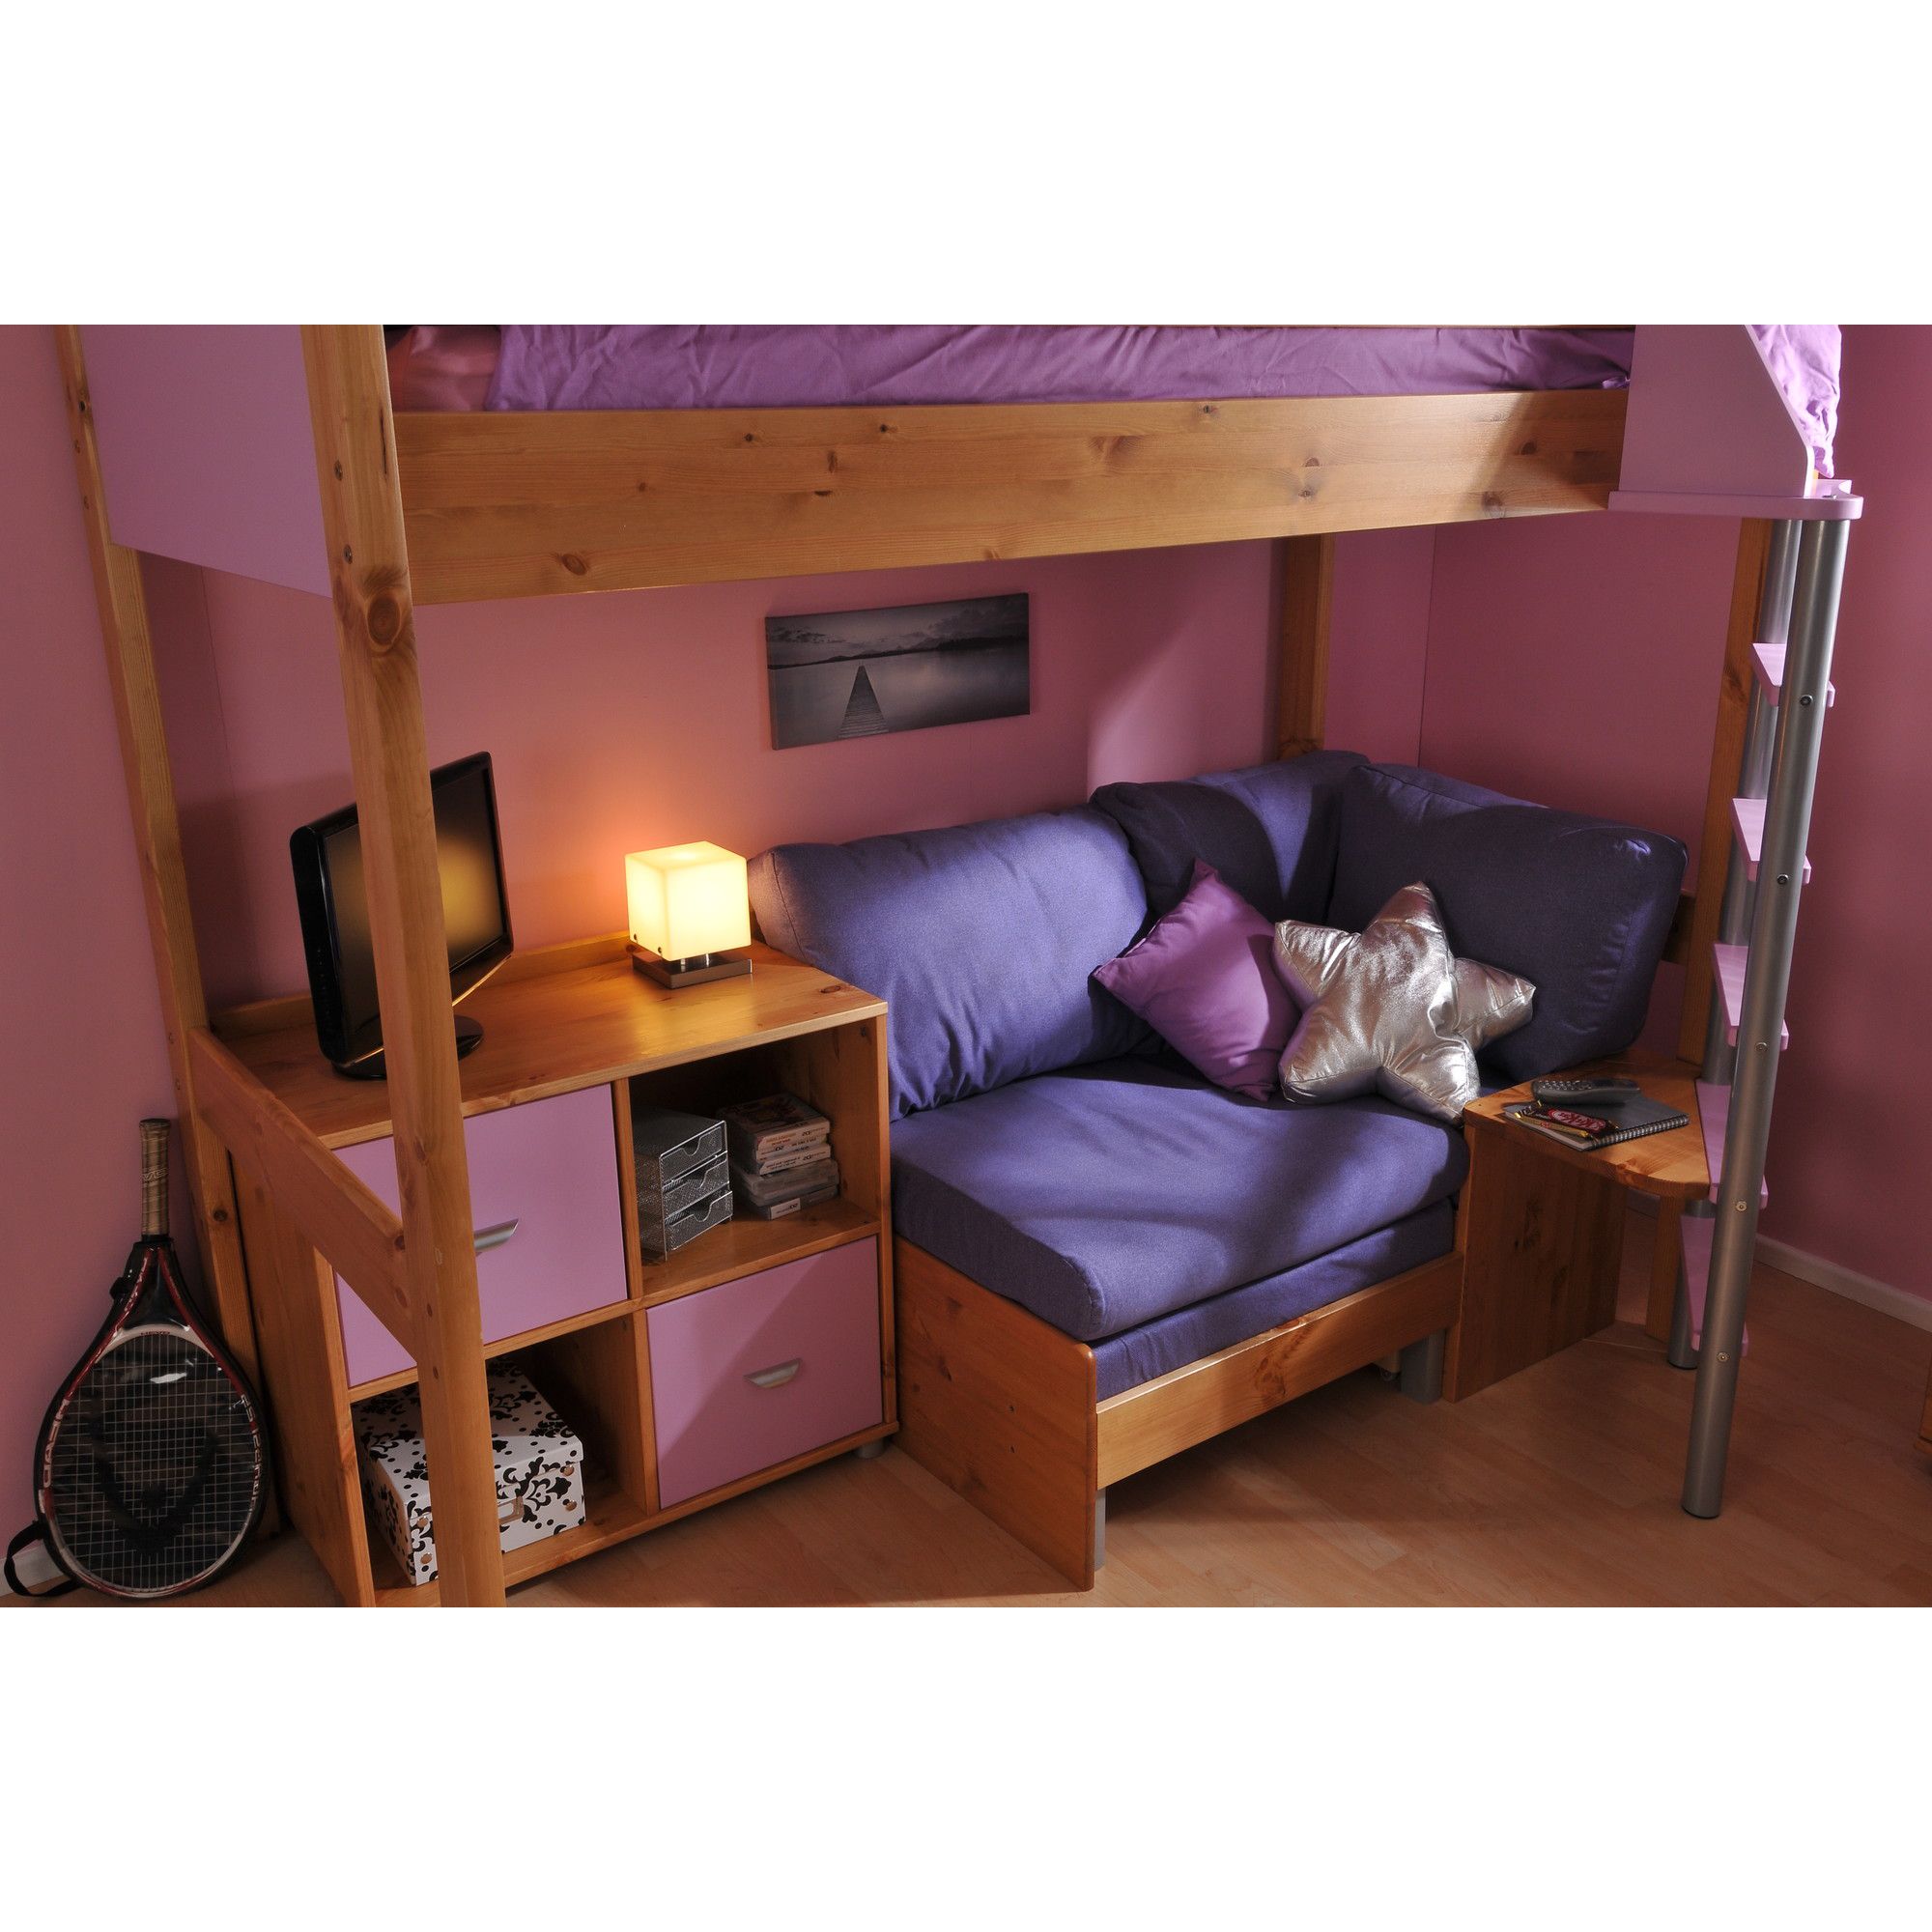 Stompa Casa High Sleeper Sofa Bed with 4 Cube Unit - Antique - Lilac - Blue Denim at Tesco Direct